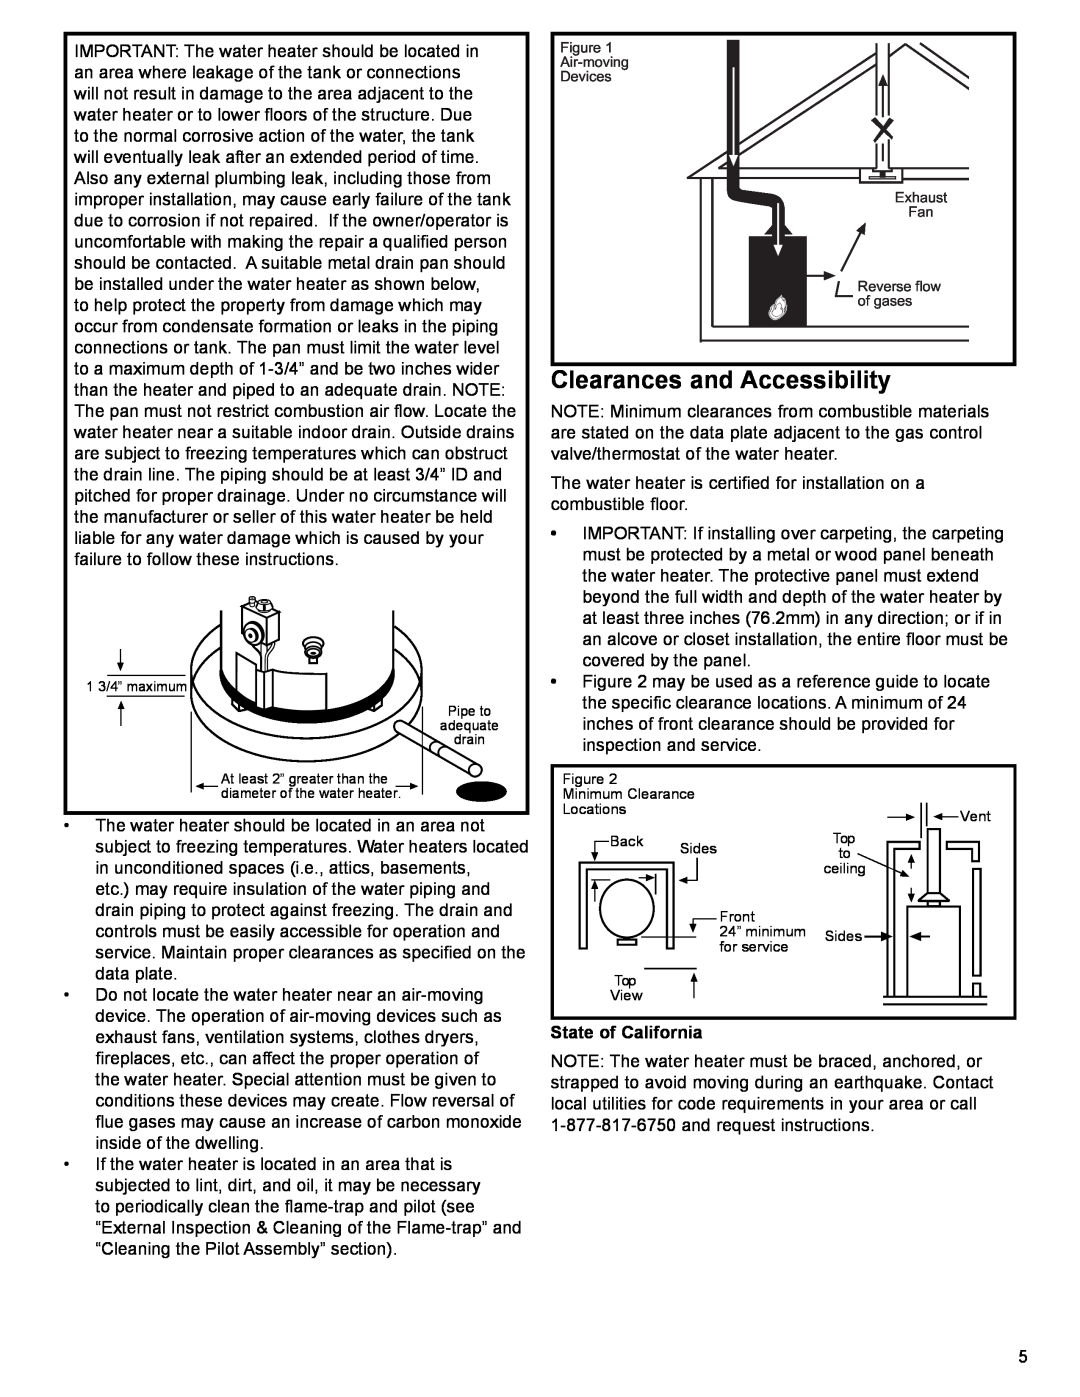 Whirlpool W10123251, 315422-000, SG1J5040T3NOV 7K, SG1J4040T3NOV 7K Clearances and Accessibility, State of California 